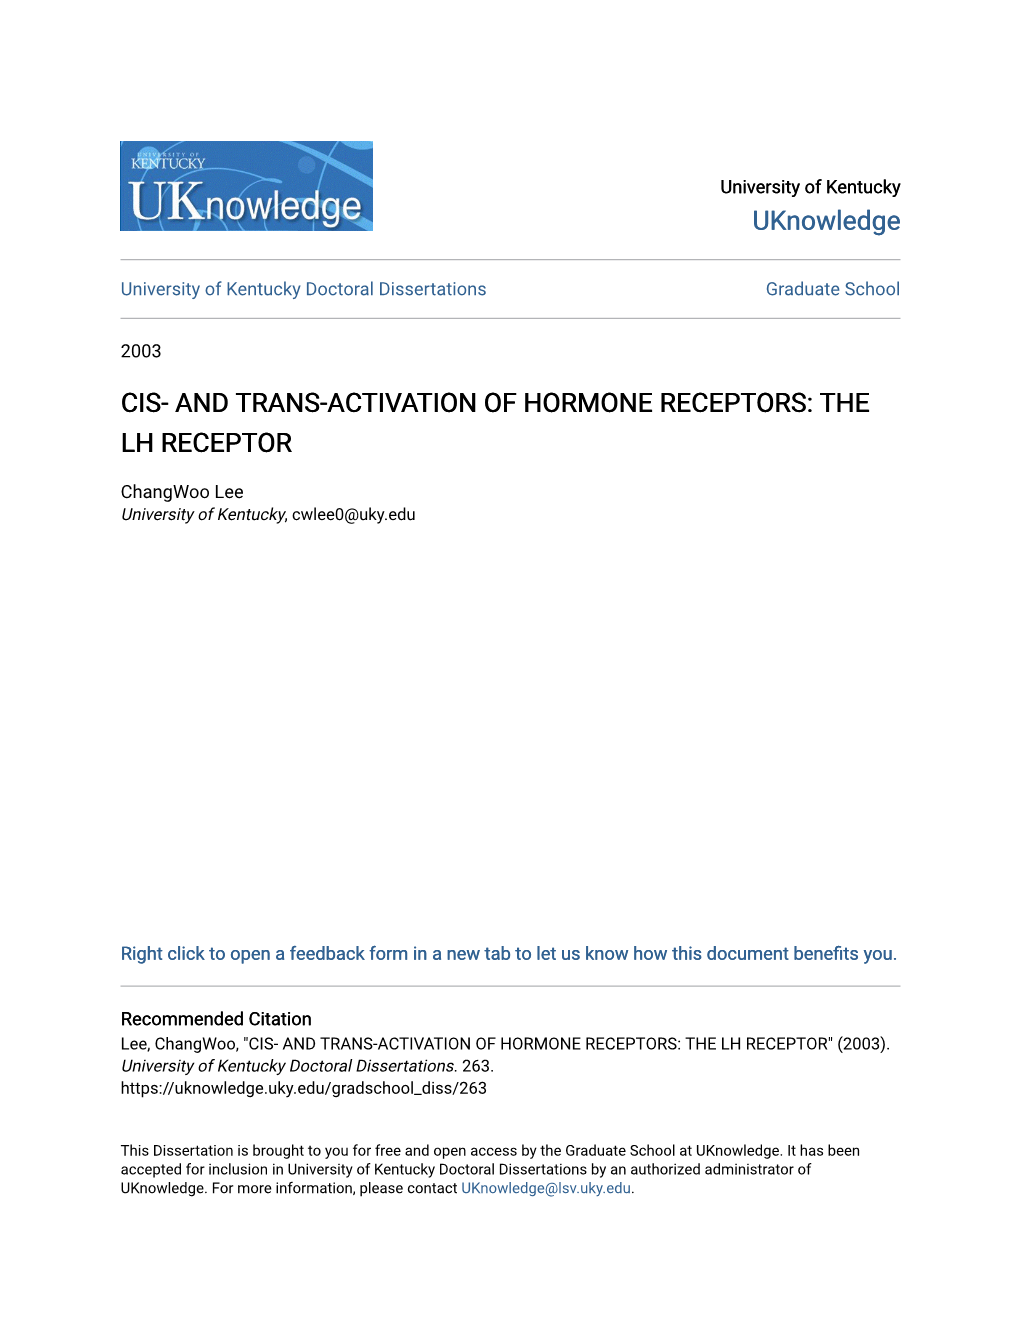 Cis- and Trans-Activation of Hormone Receptors: the Lh Receptor